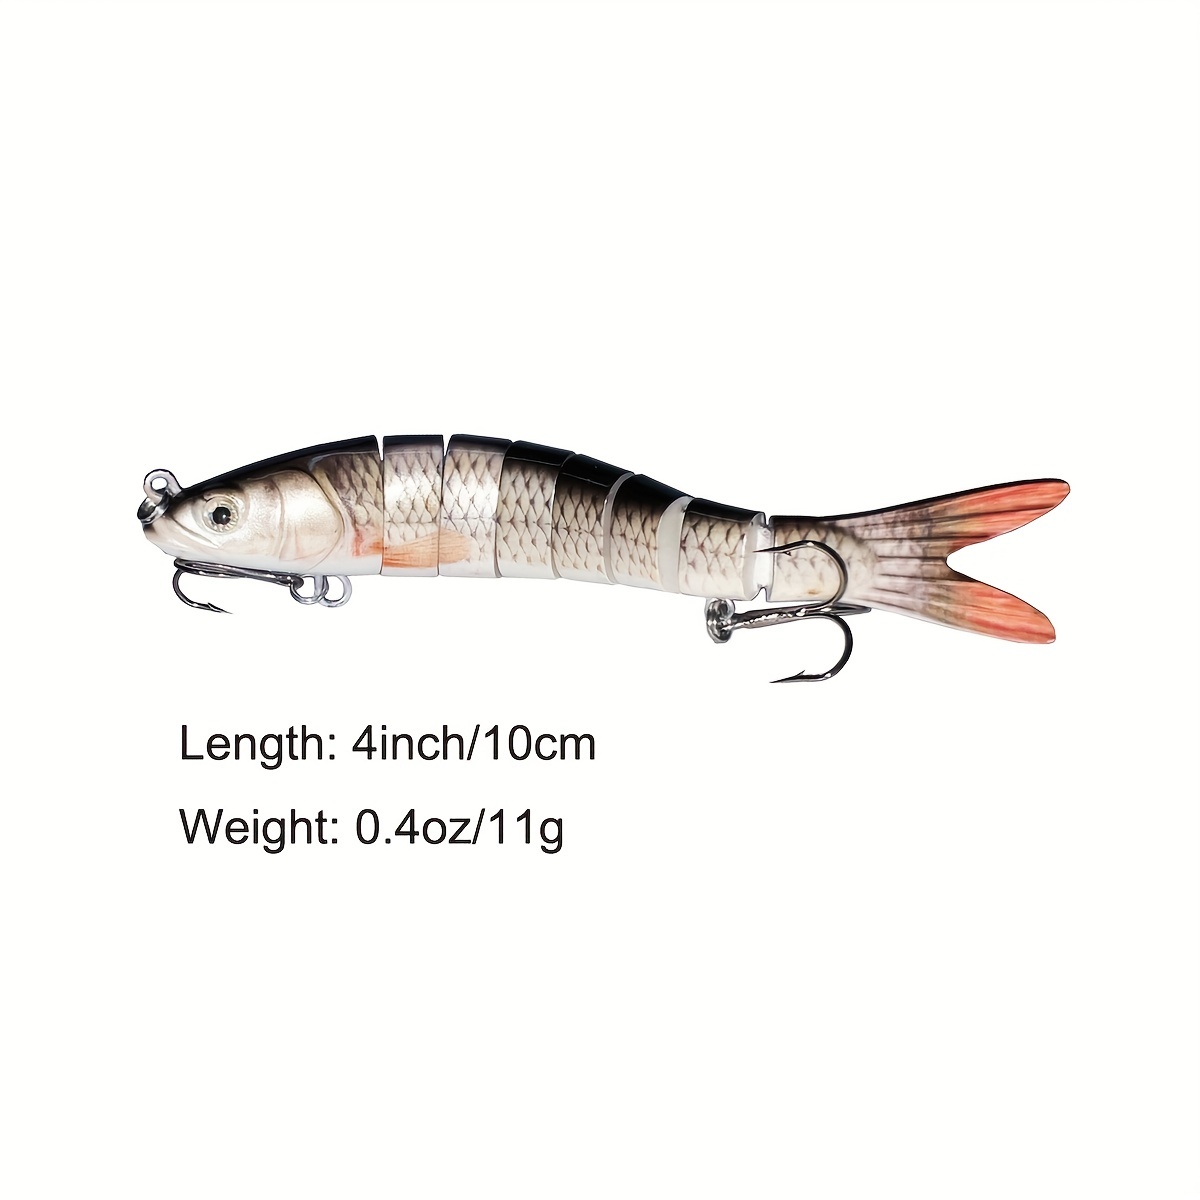 3.94/5.51inch Sinking Wobblers, Fishing Lures, Jointed Crankbait, Swimbait  8 Segment, Hard Artificial Bait For Fishing Tackle Lure